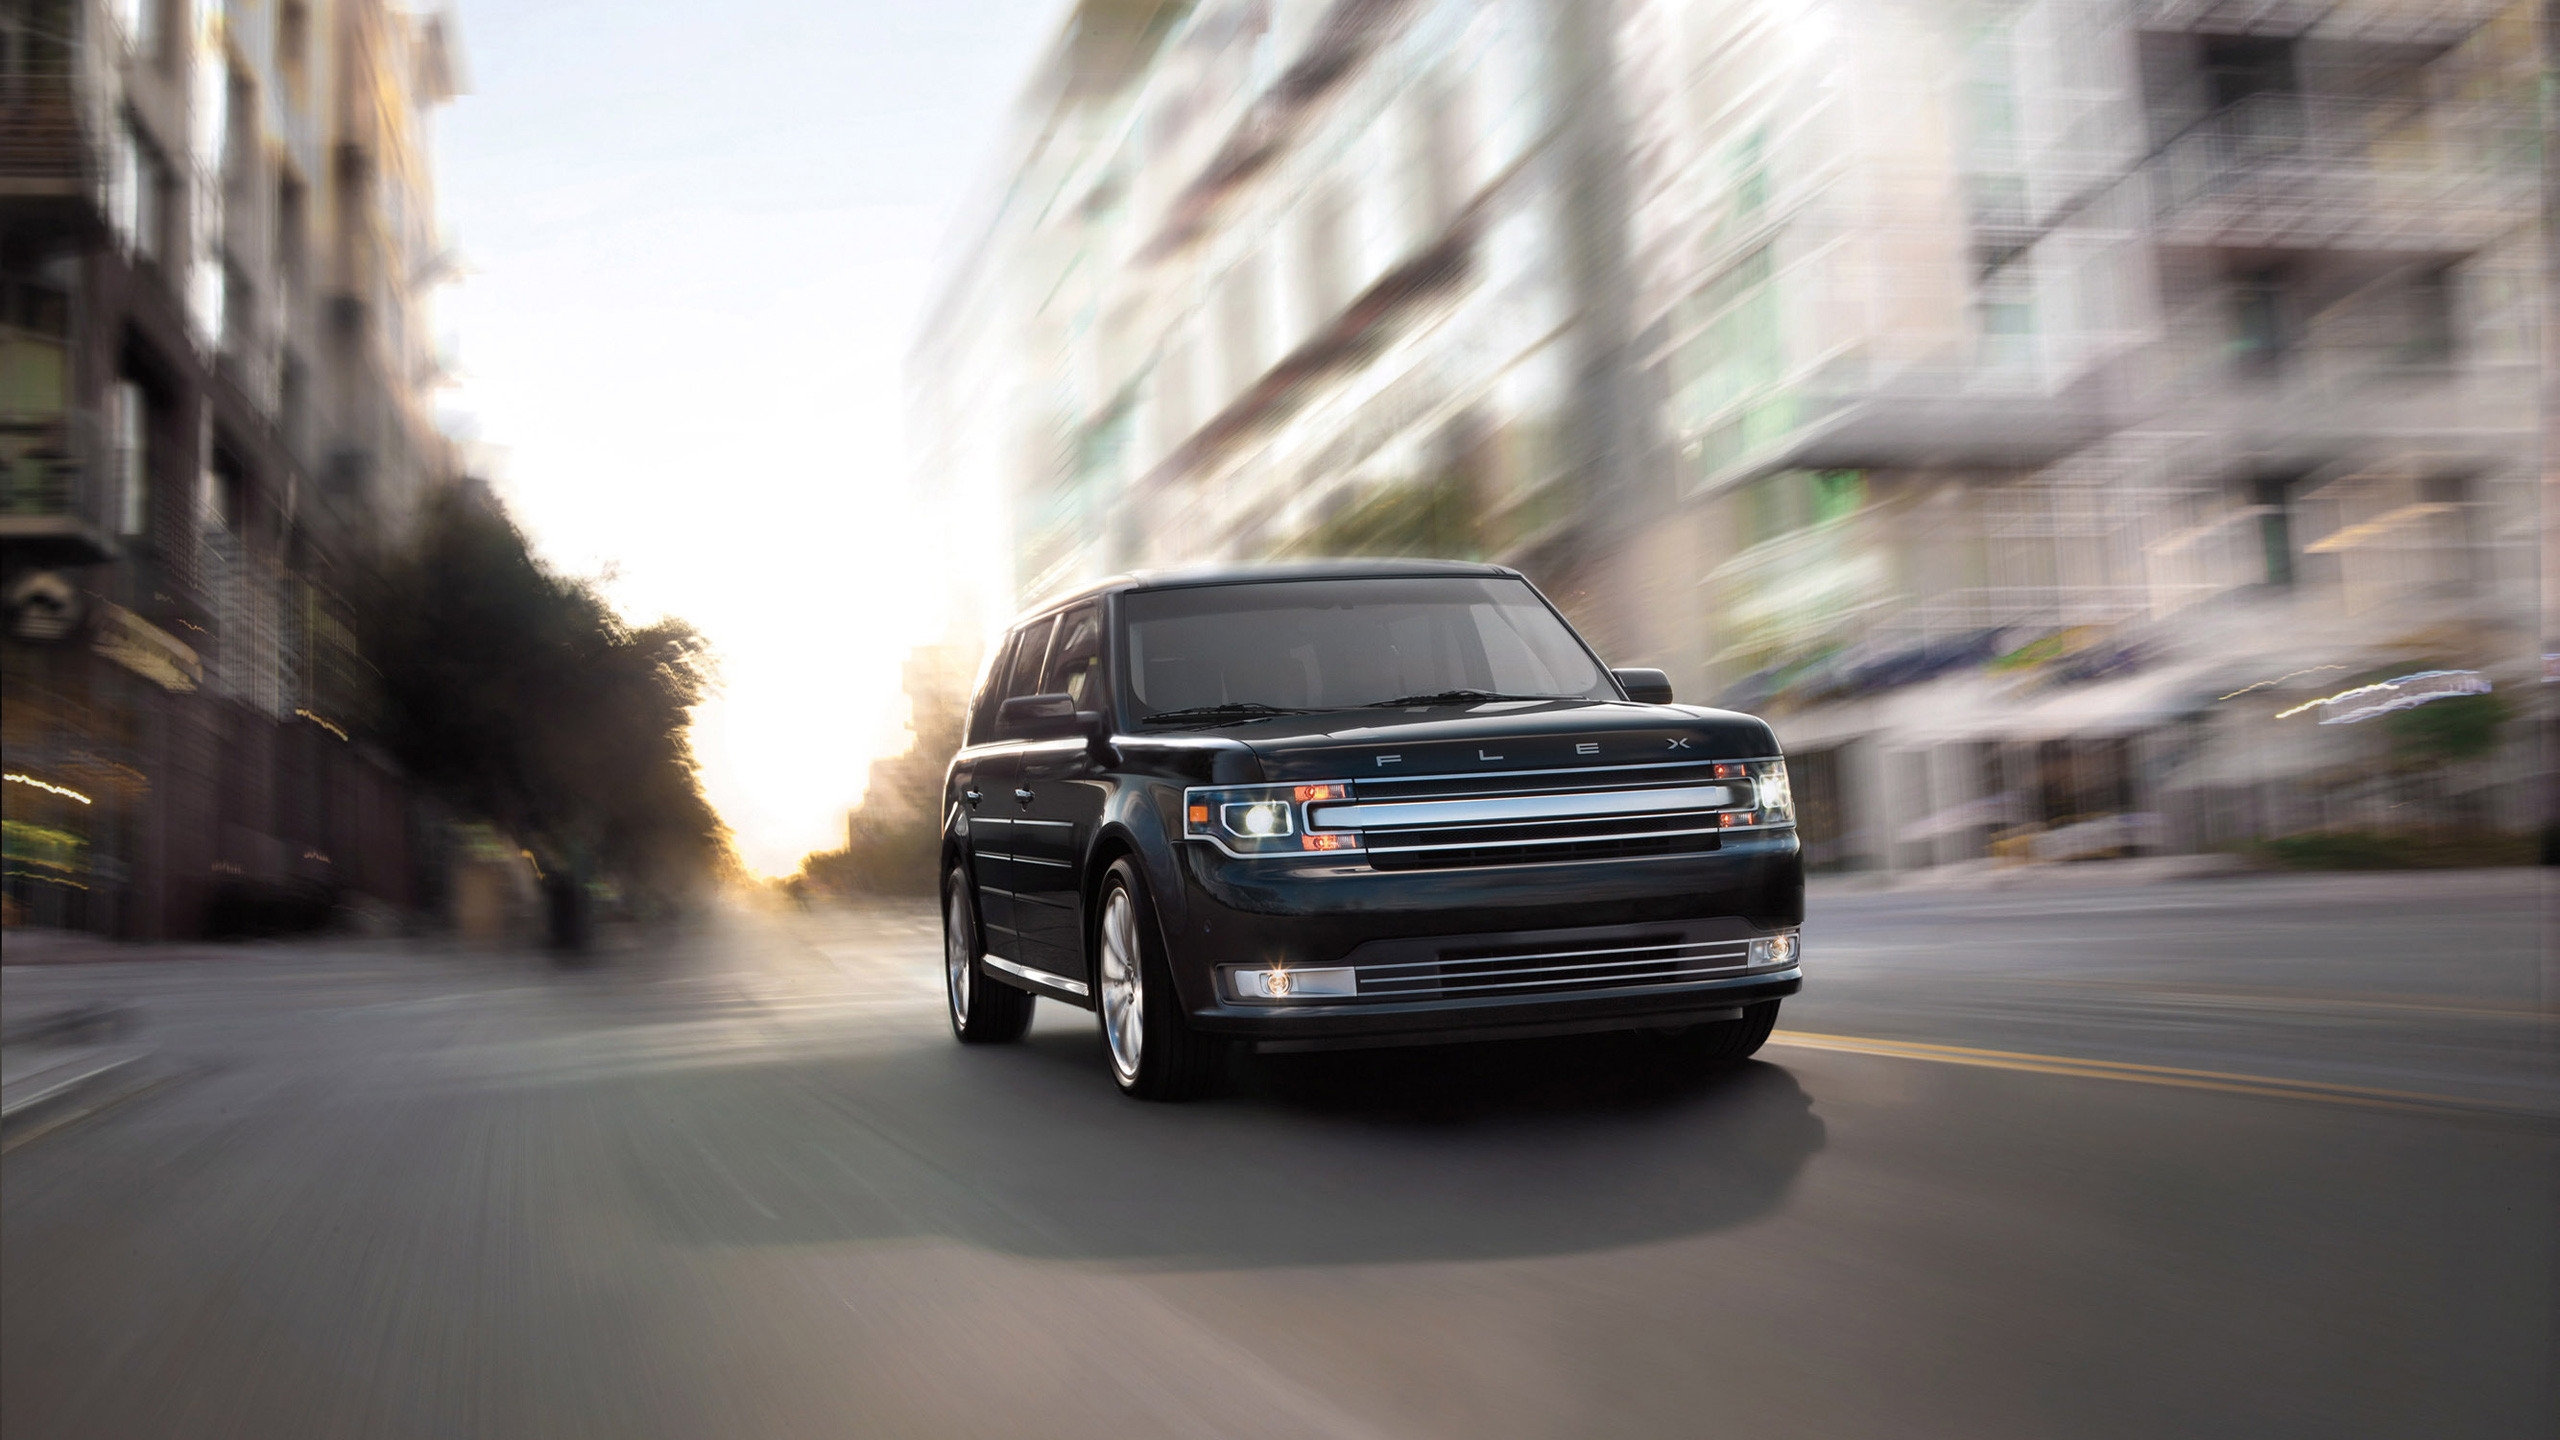 Speed with Ford Flex Model 2013 for 2560x1440 HDTV resolution